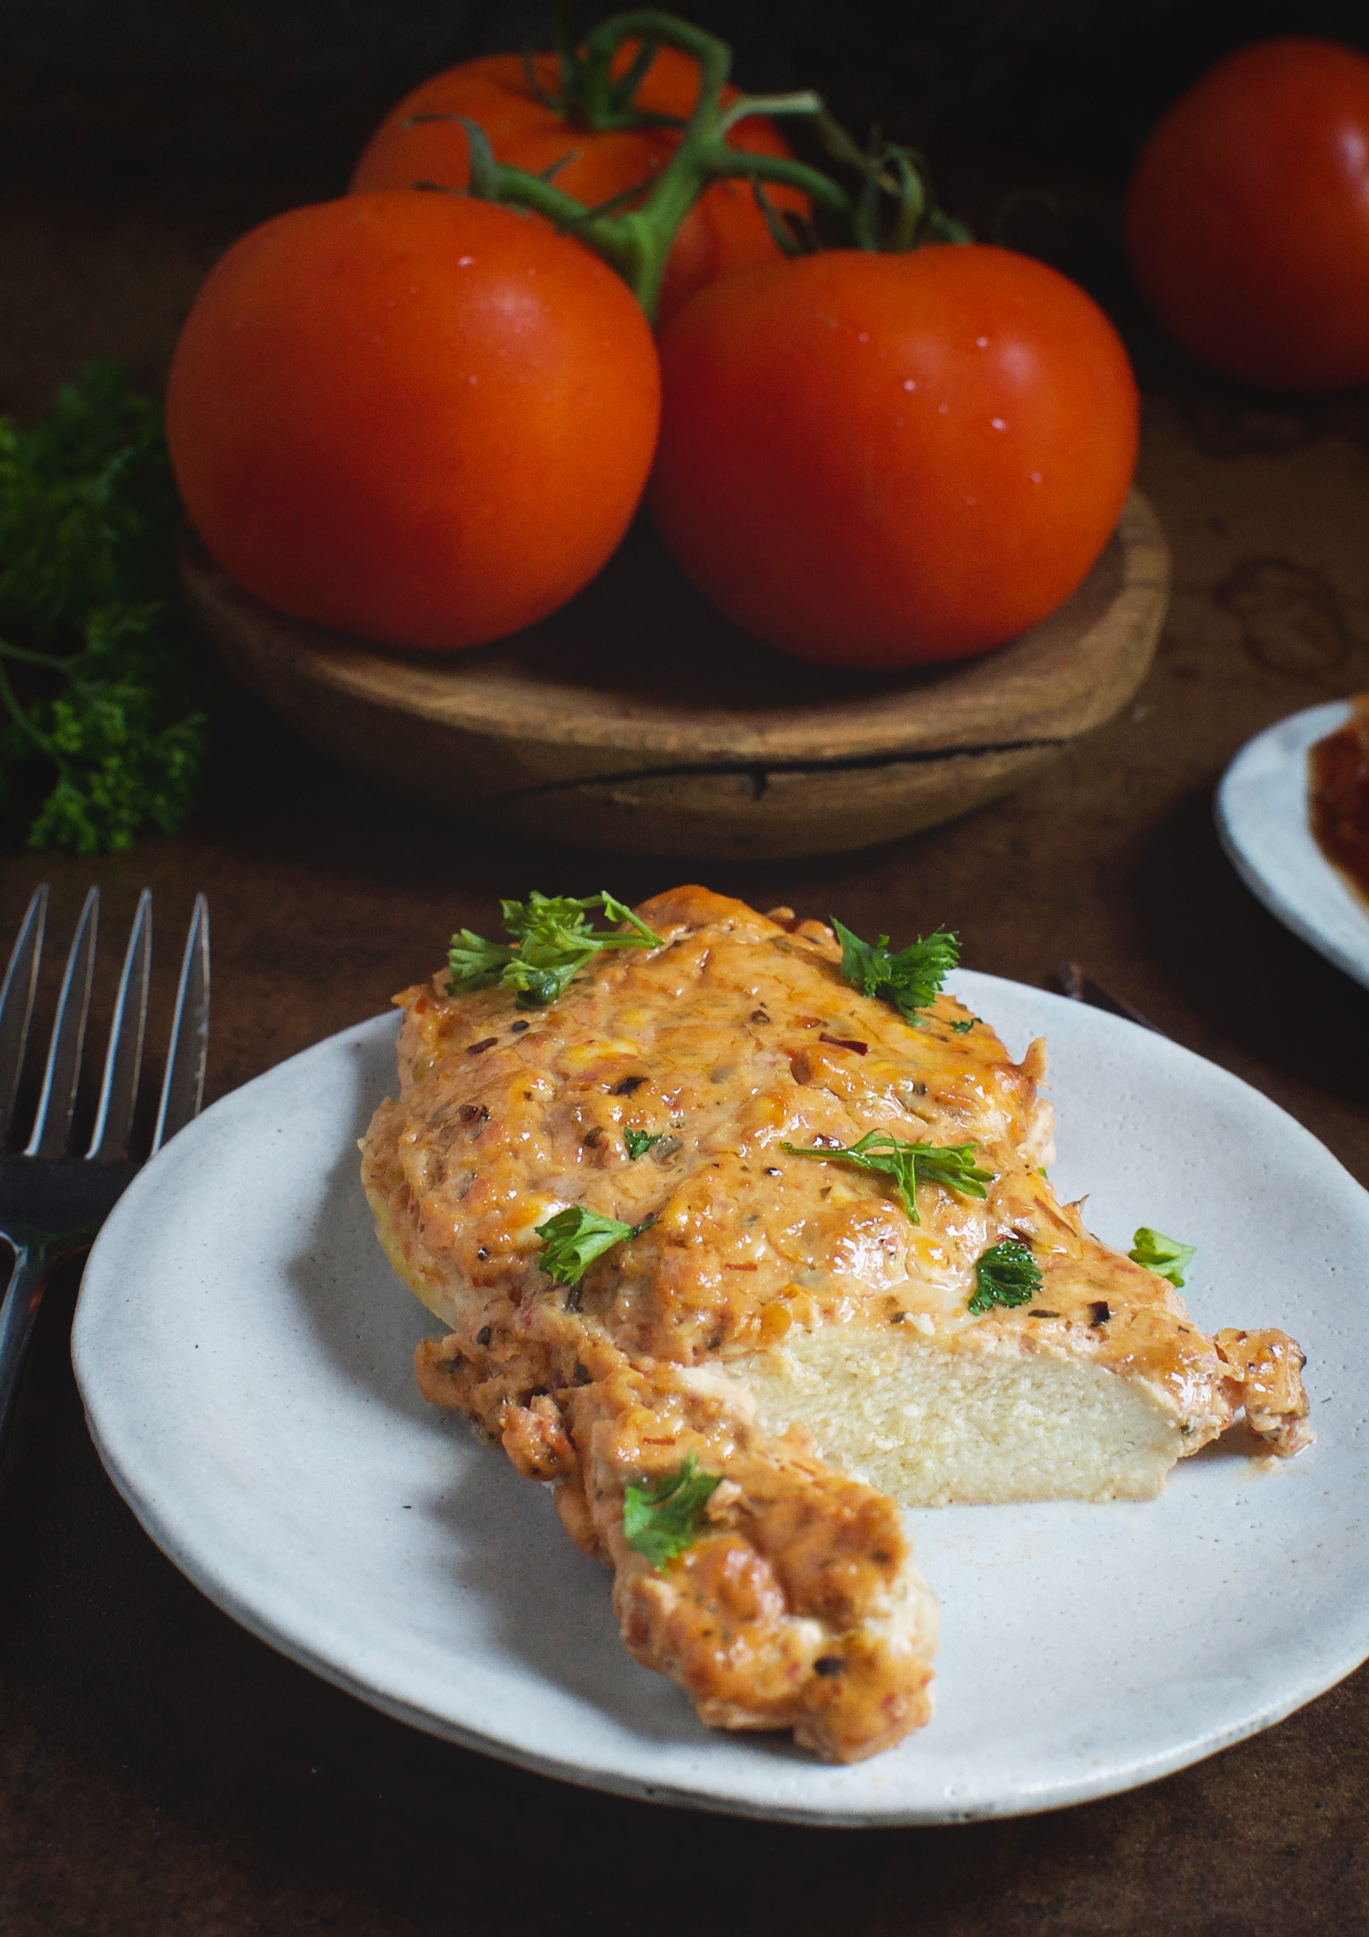 This Super Easy Spicy Baked Chicken recipe makes a delicious main course! This chicken dish has a creamy, but spicy sauce that can be enjoyed by people on low-carb, ketogenic, lc/hf, Atkins, diabetic, gluten-free, grain free, and Banting diets. 